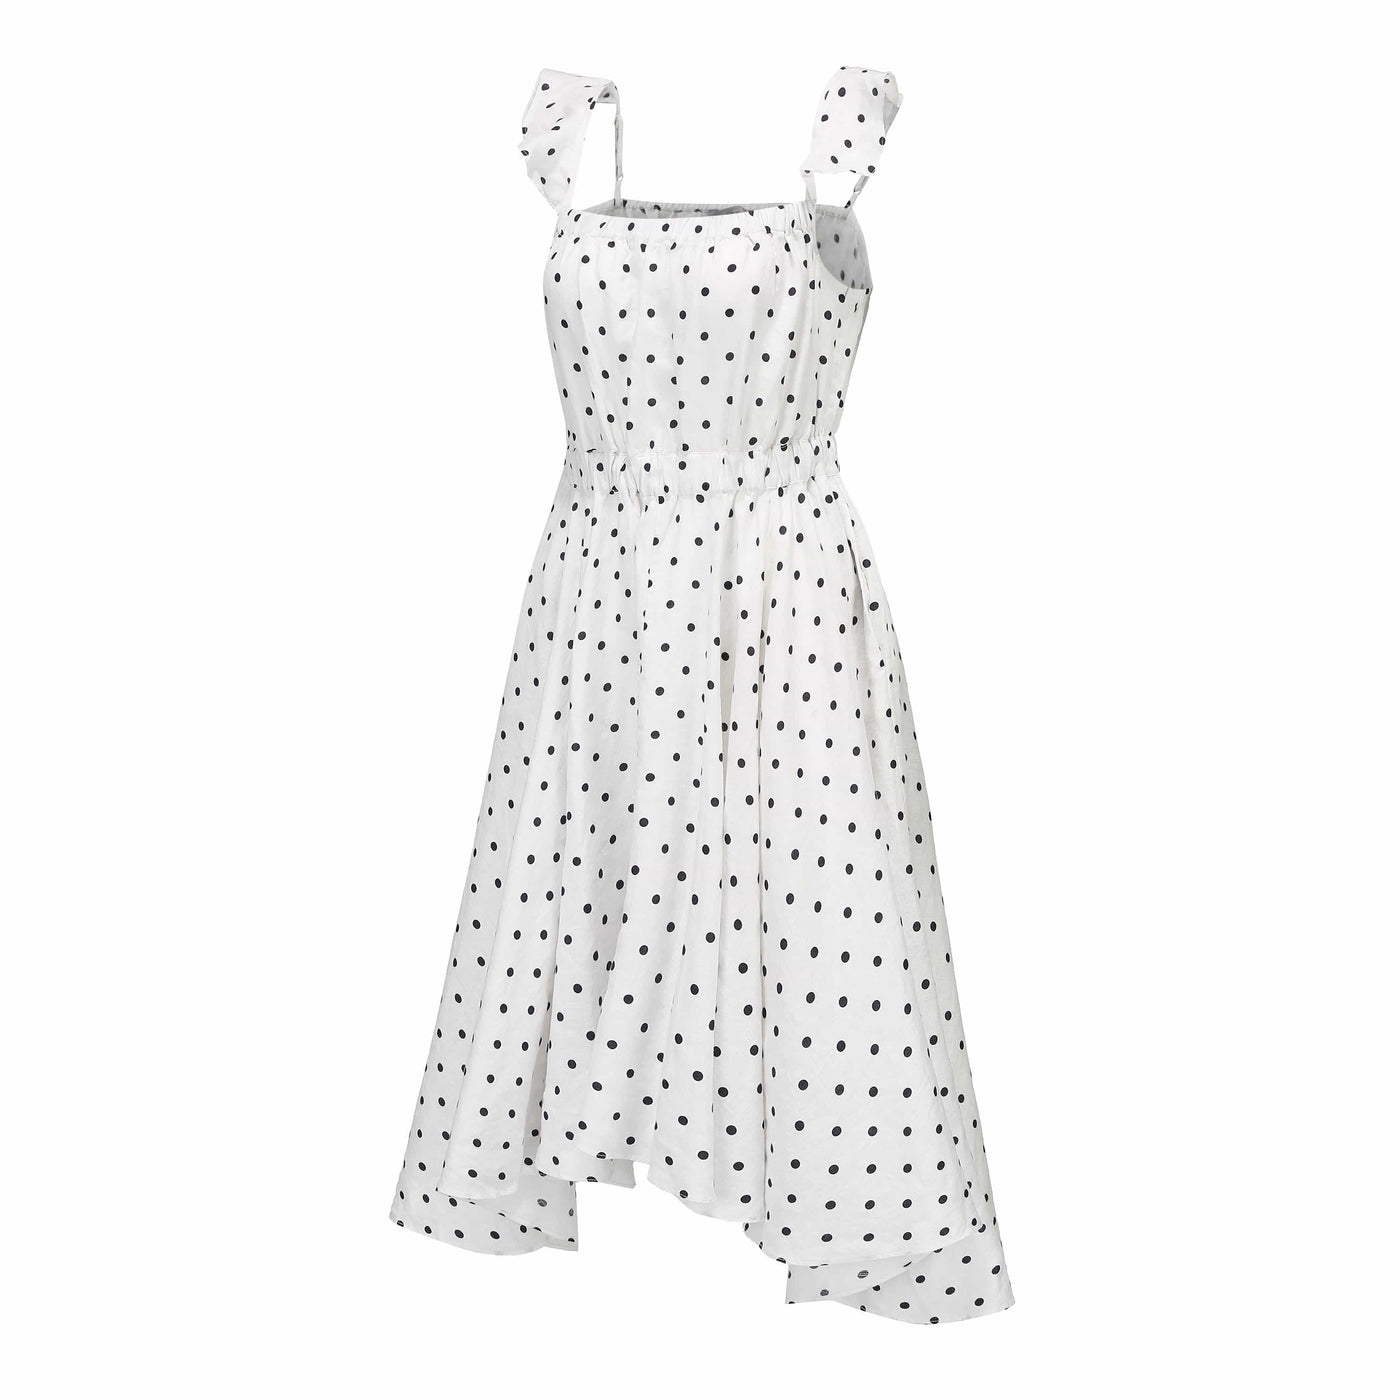 Lilly Pilly Collection 100% organic linen Mia Dress in Polka Dot as 3D model side view